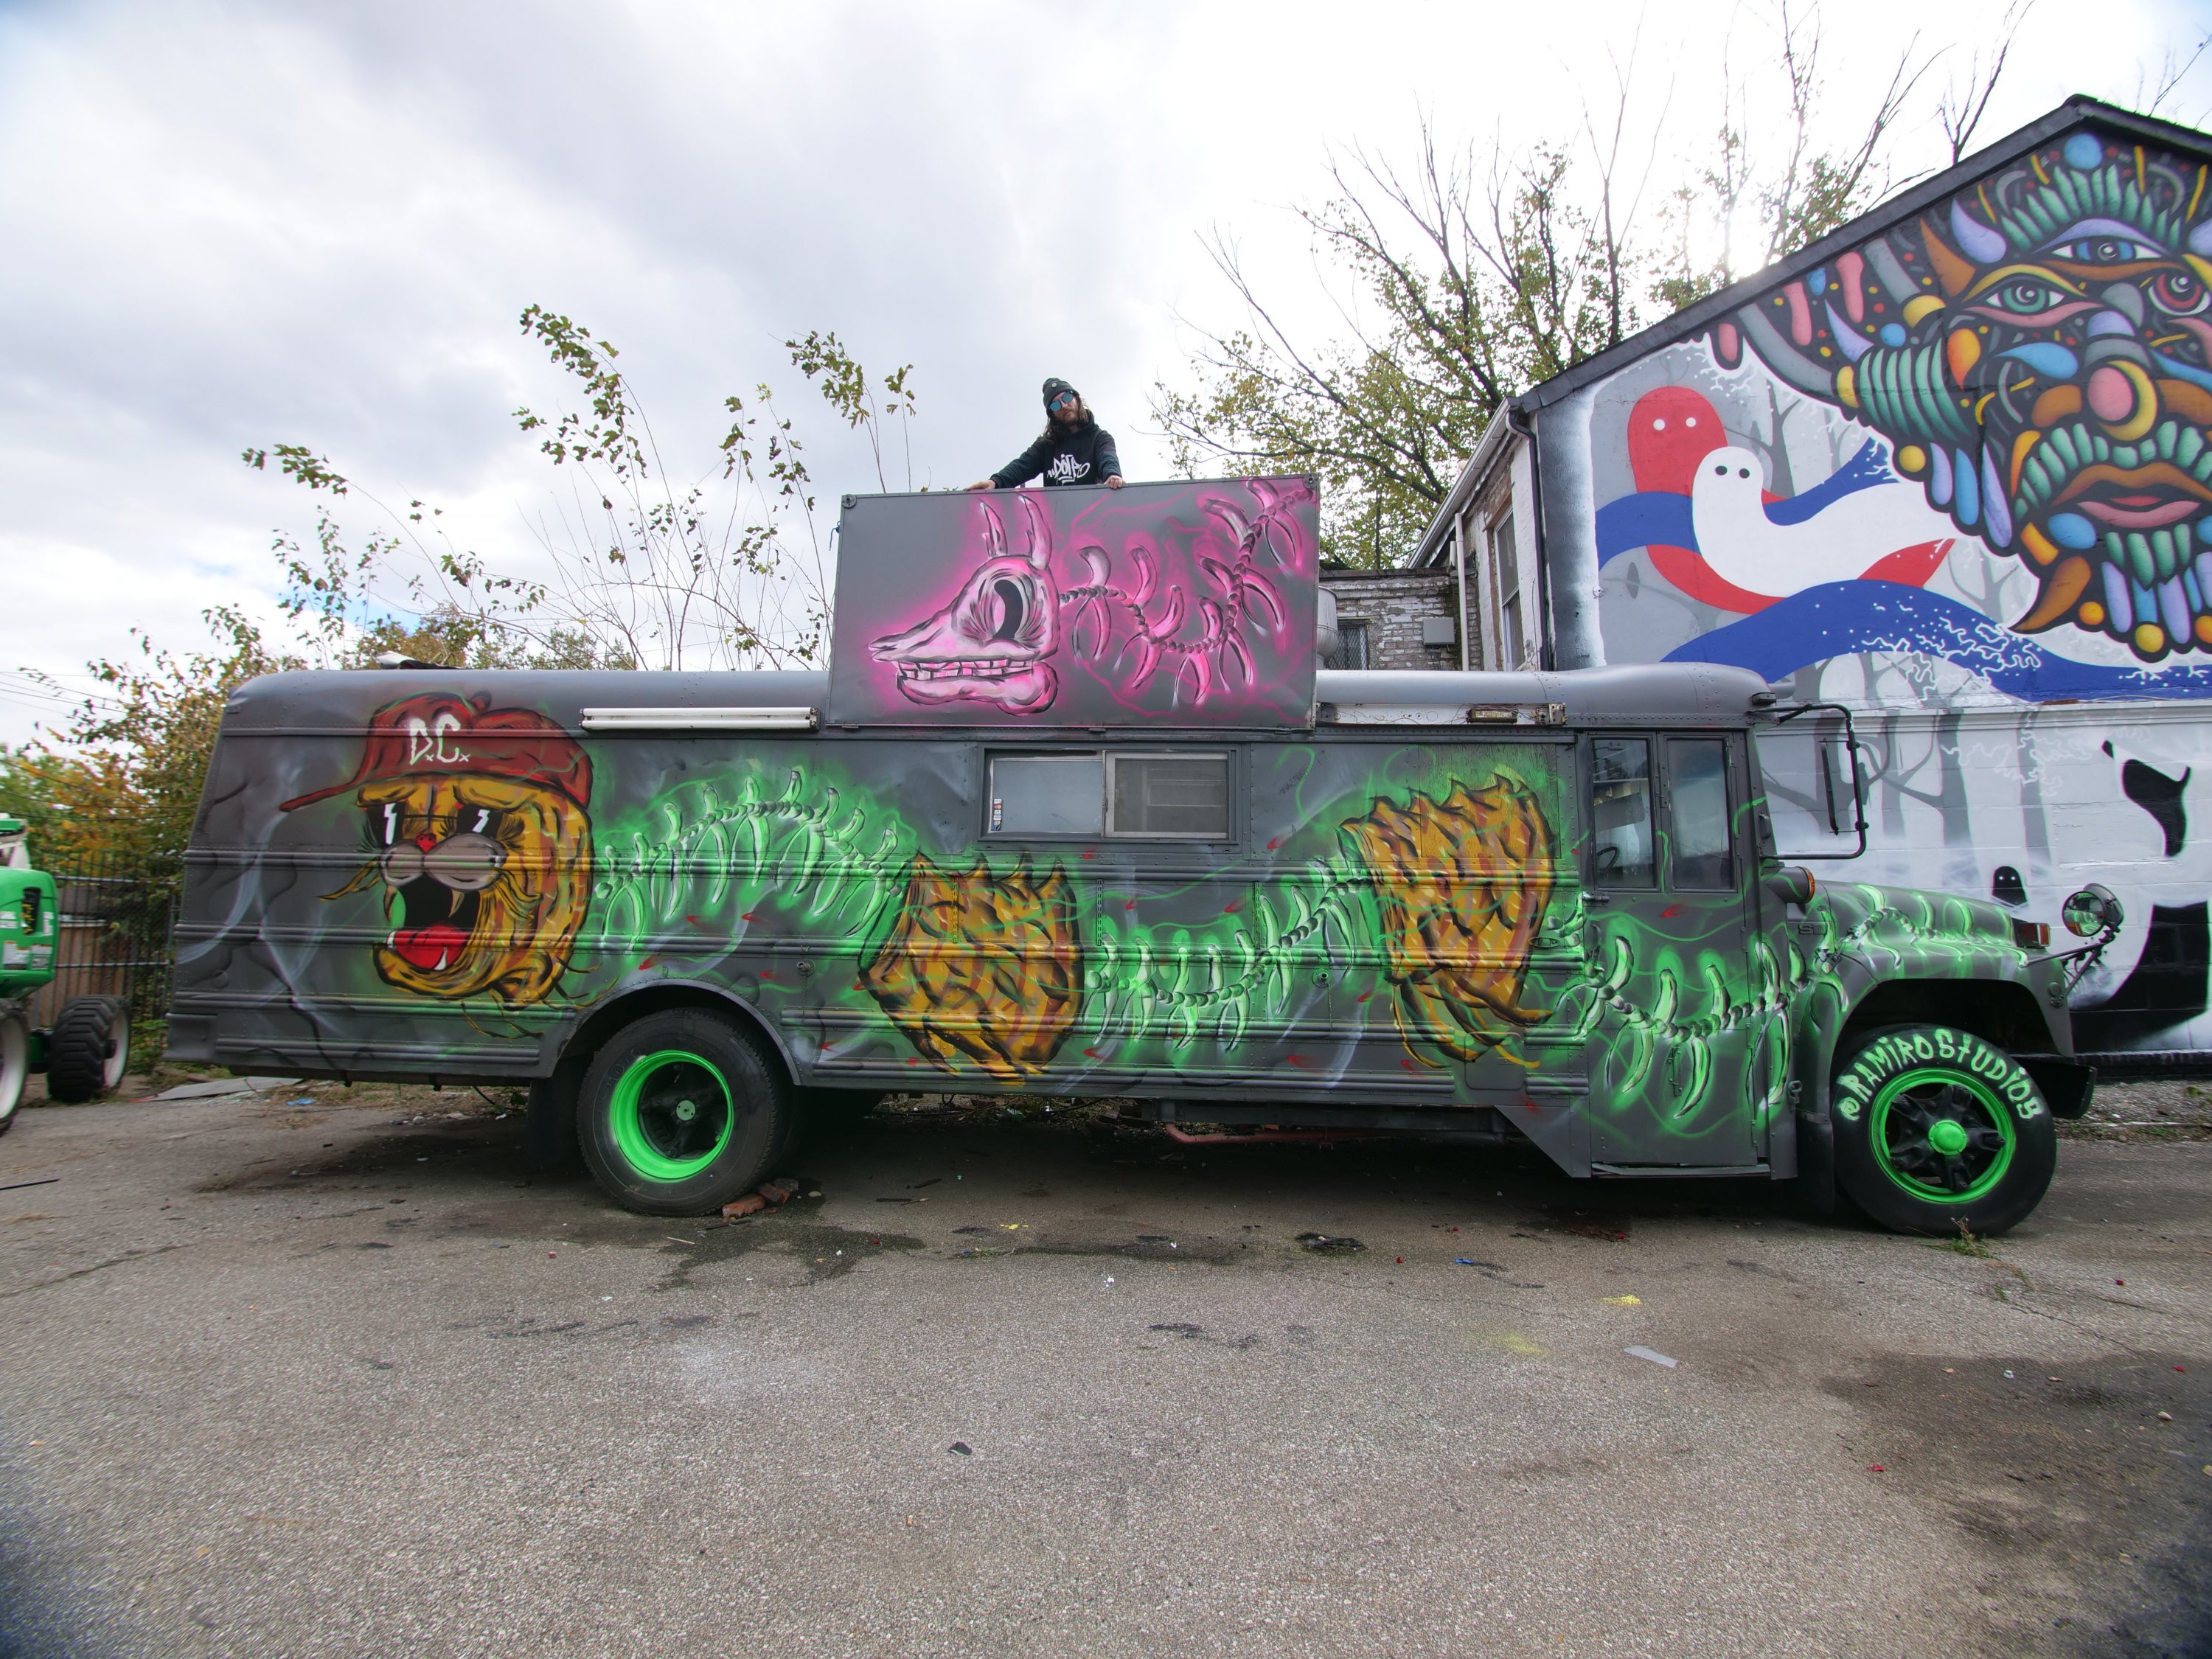 Sip Frozen Drinks At This Graffitied Bar Bus And Beer Garden Coming To Shaw Washingtonian Dc